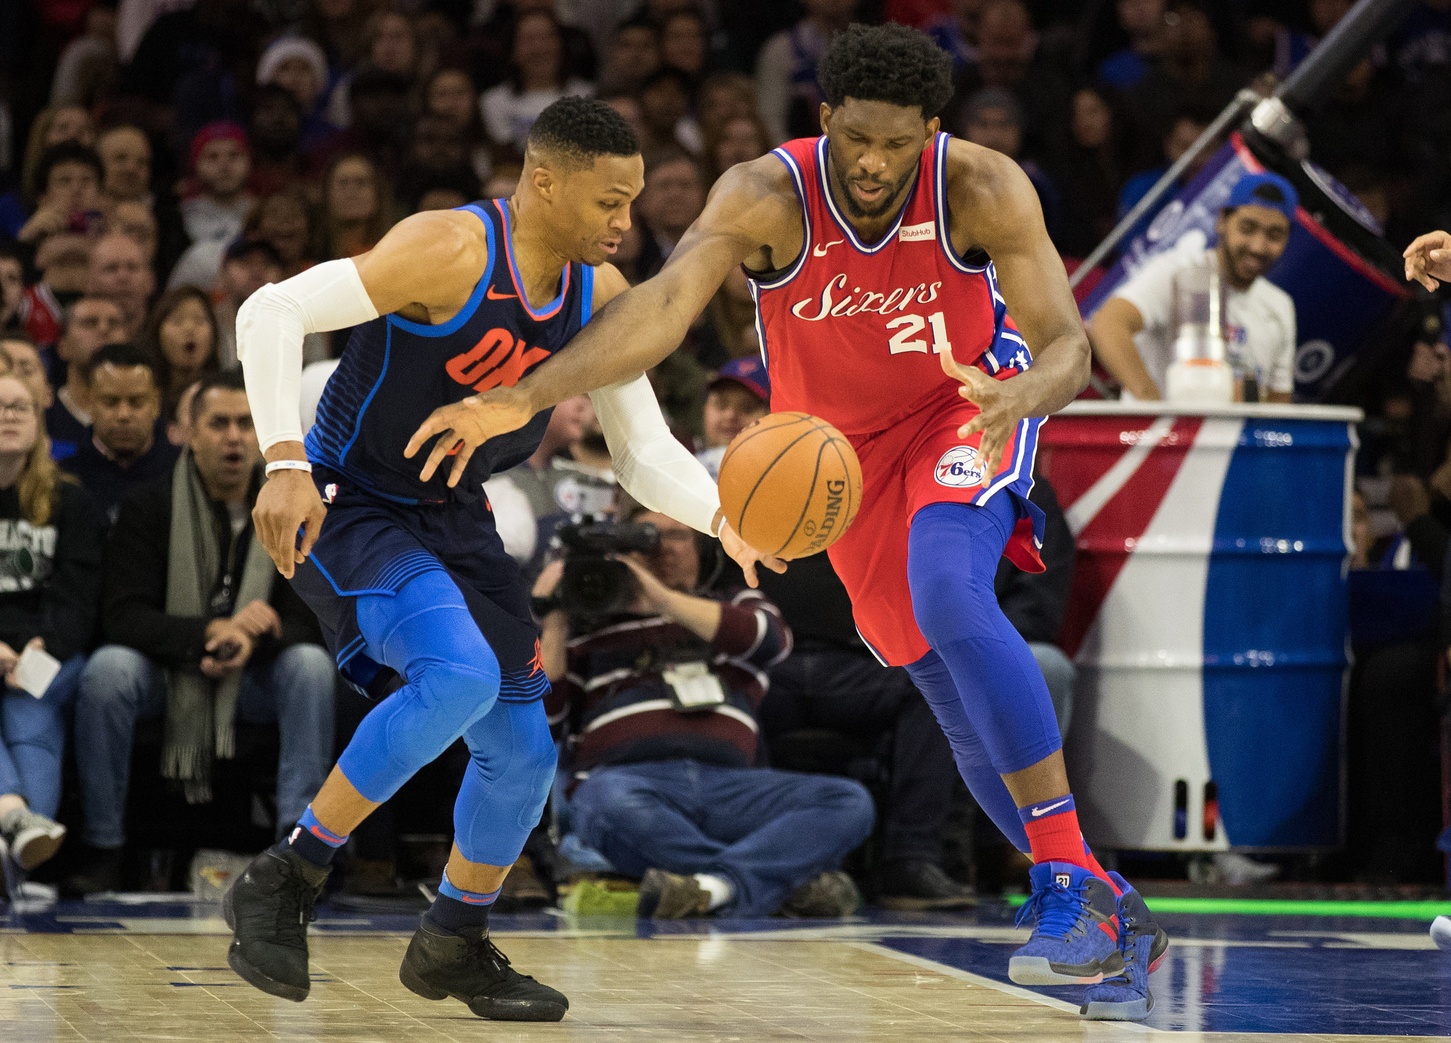 UPDATE: “Club Hand” Keeps Joel Embiid Out of Spurs Game